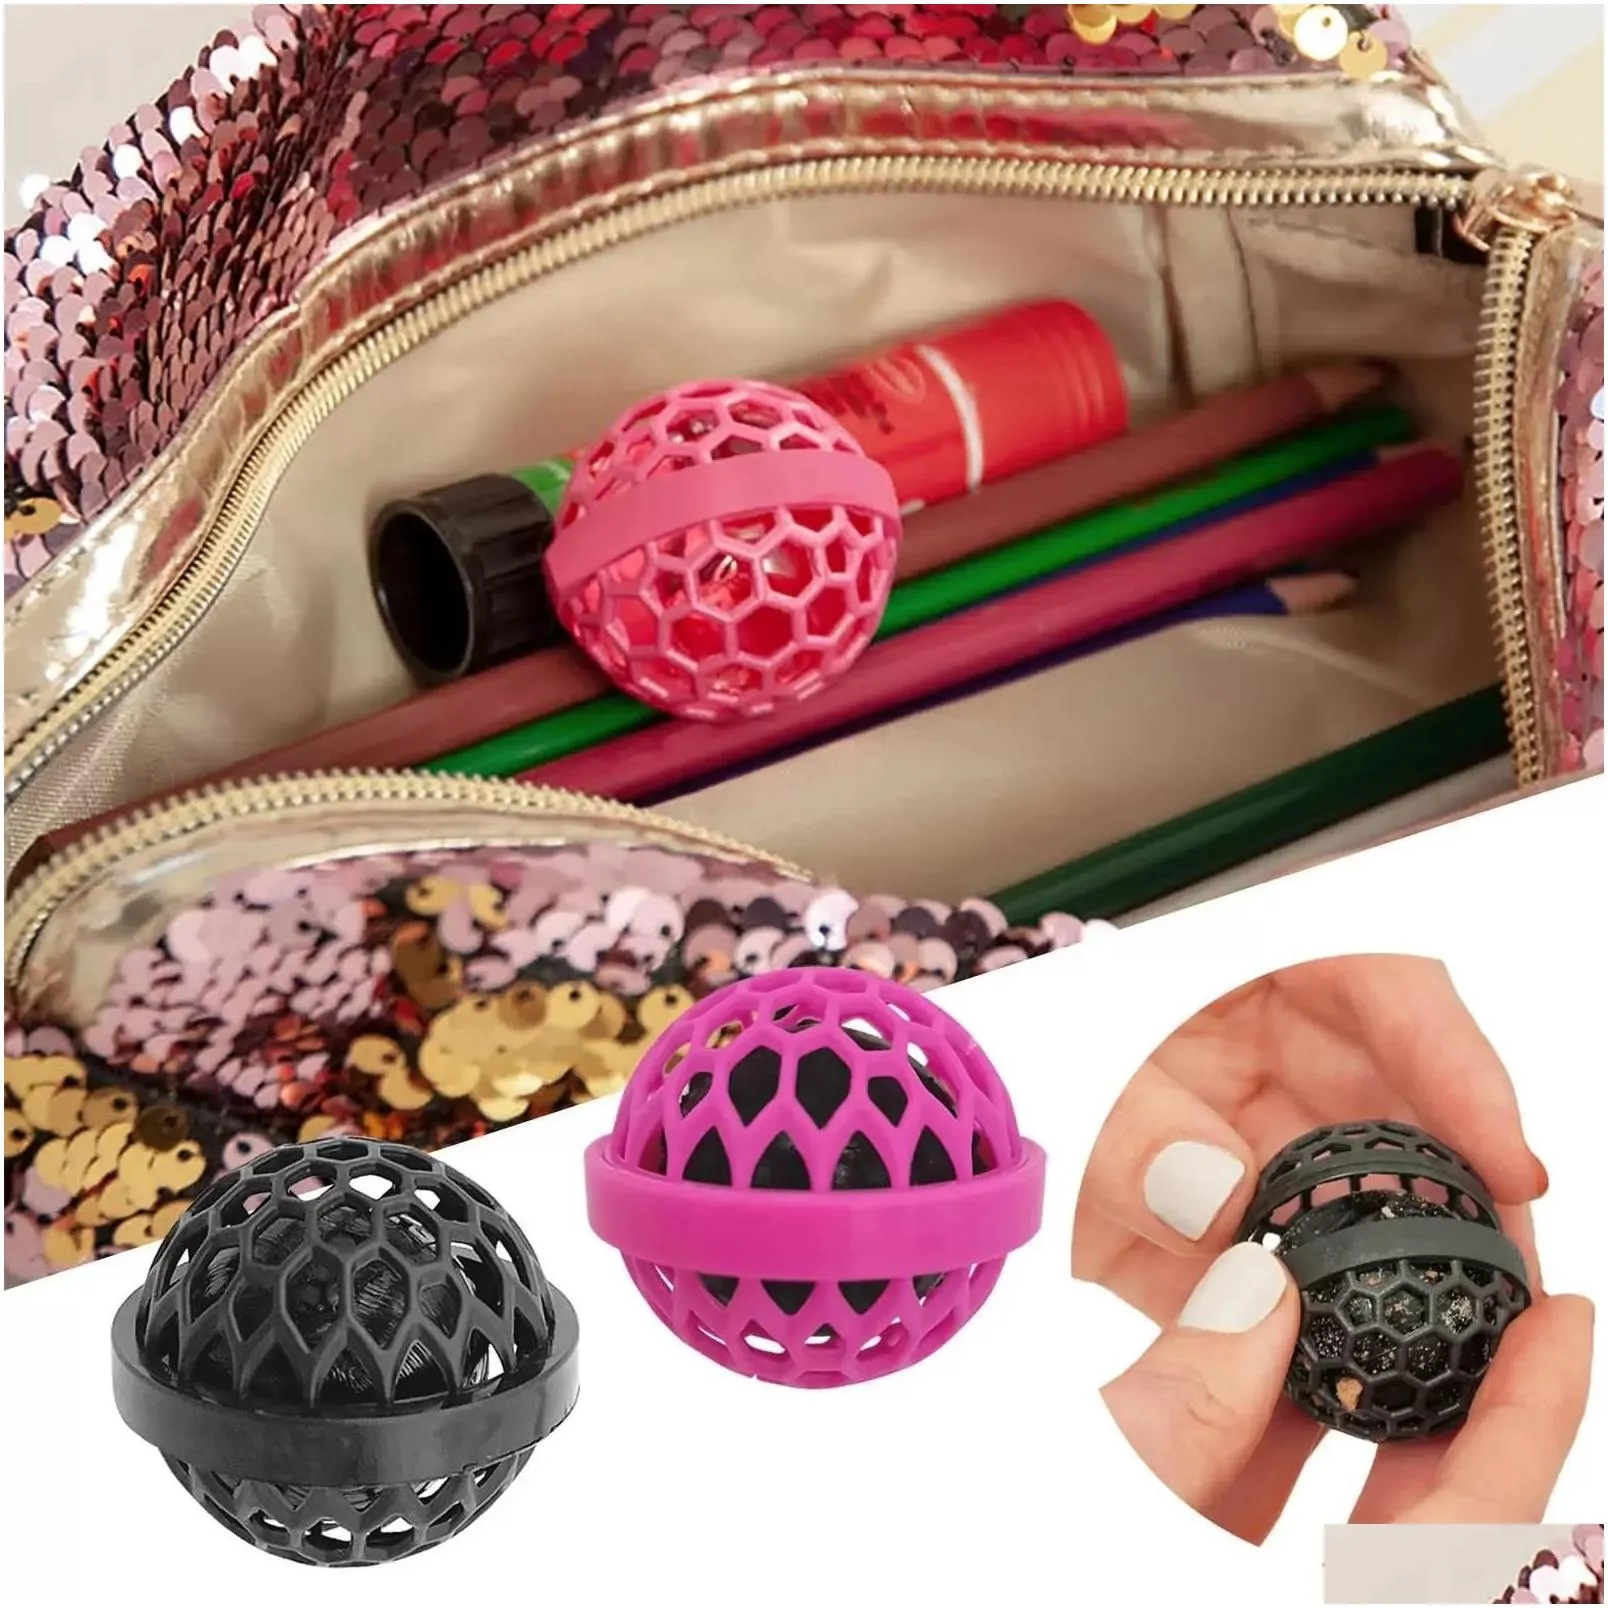 lint removers lint removers picks up dust dirt crumbs backpacks purse inner stickys balls keep bags clean backpack ball sticky insid